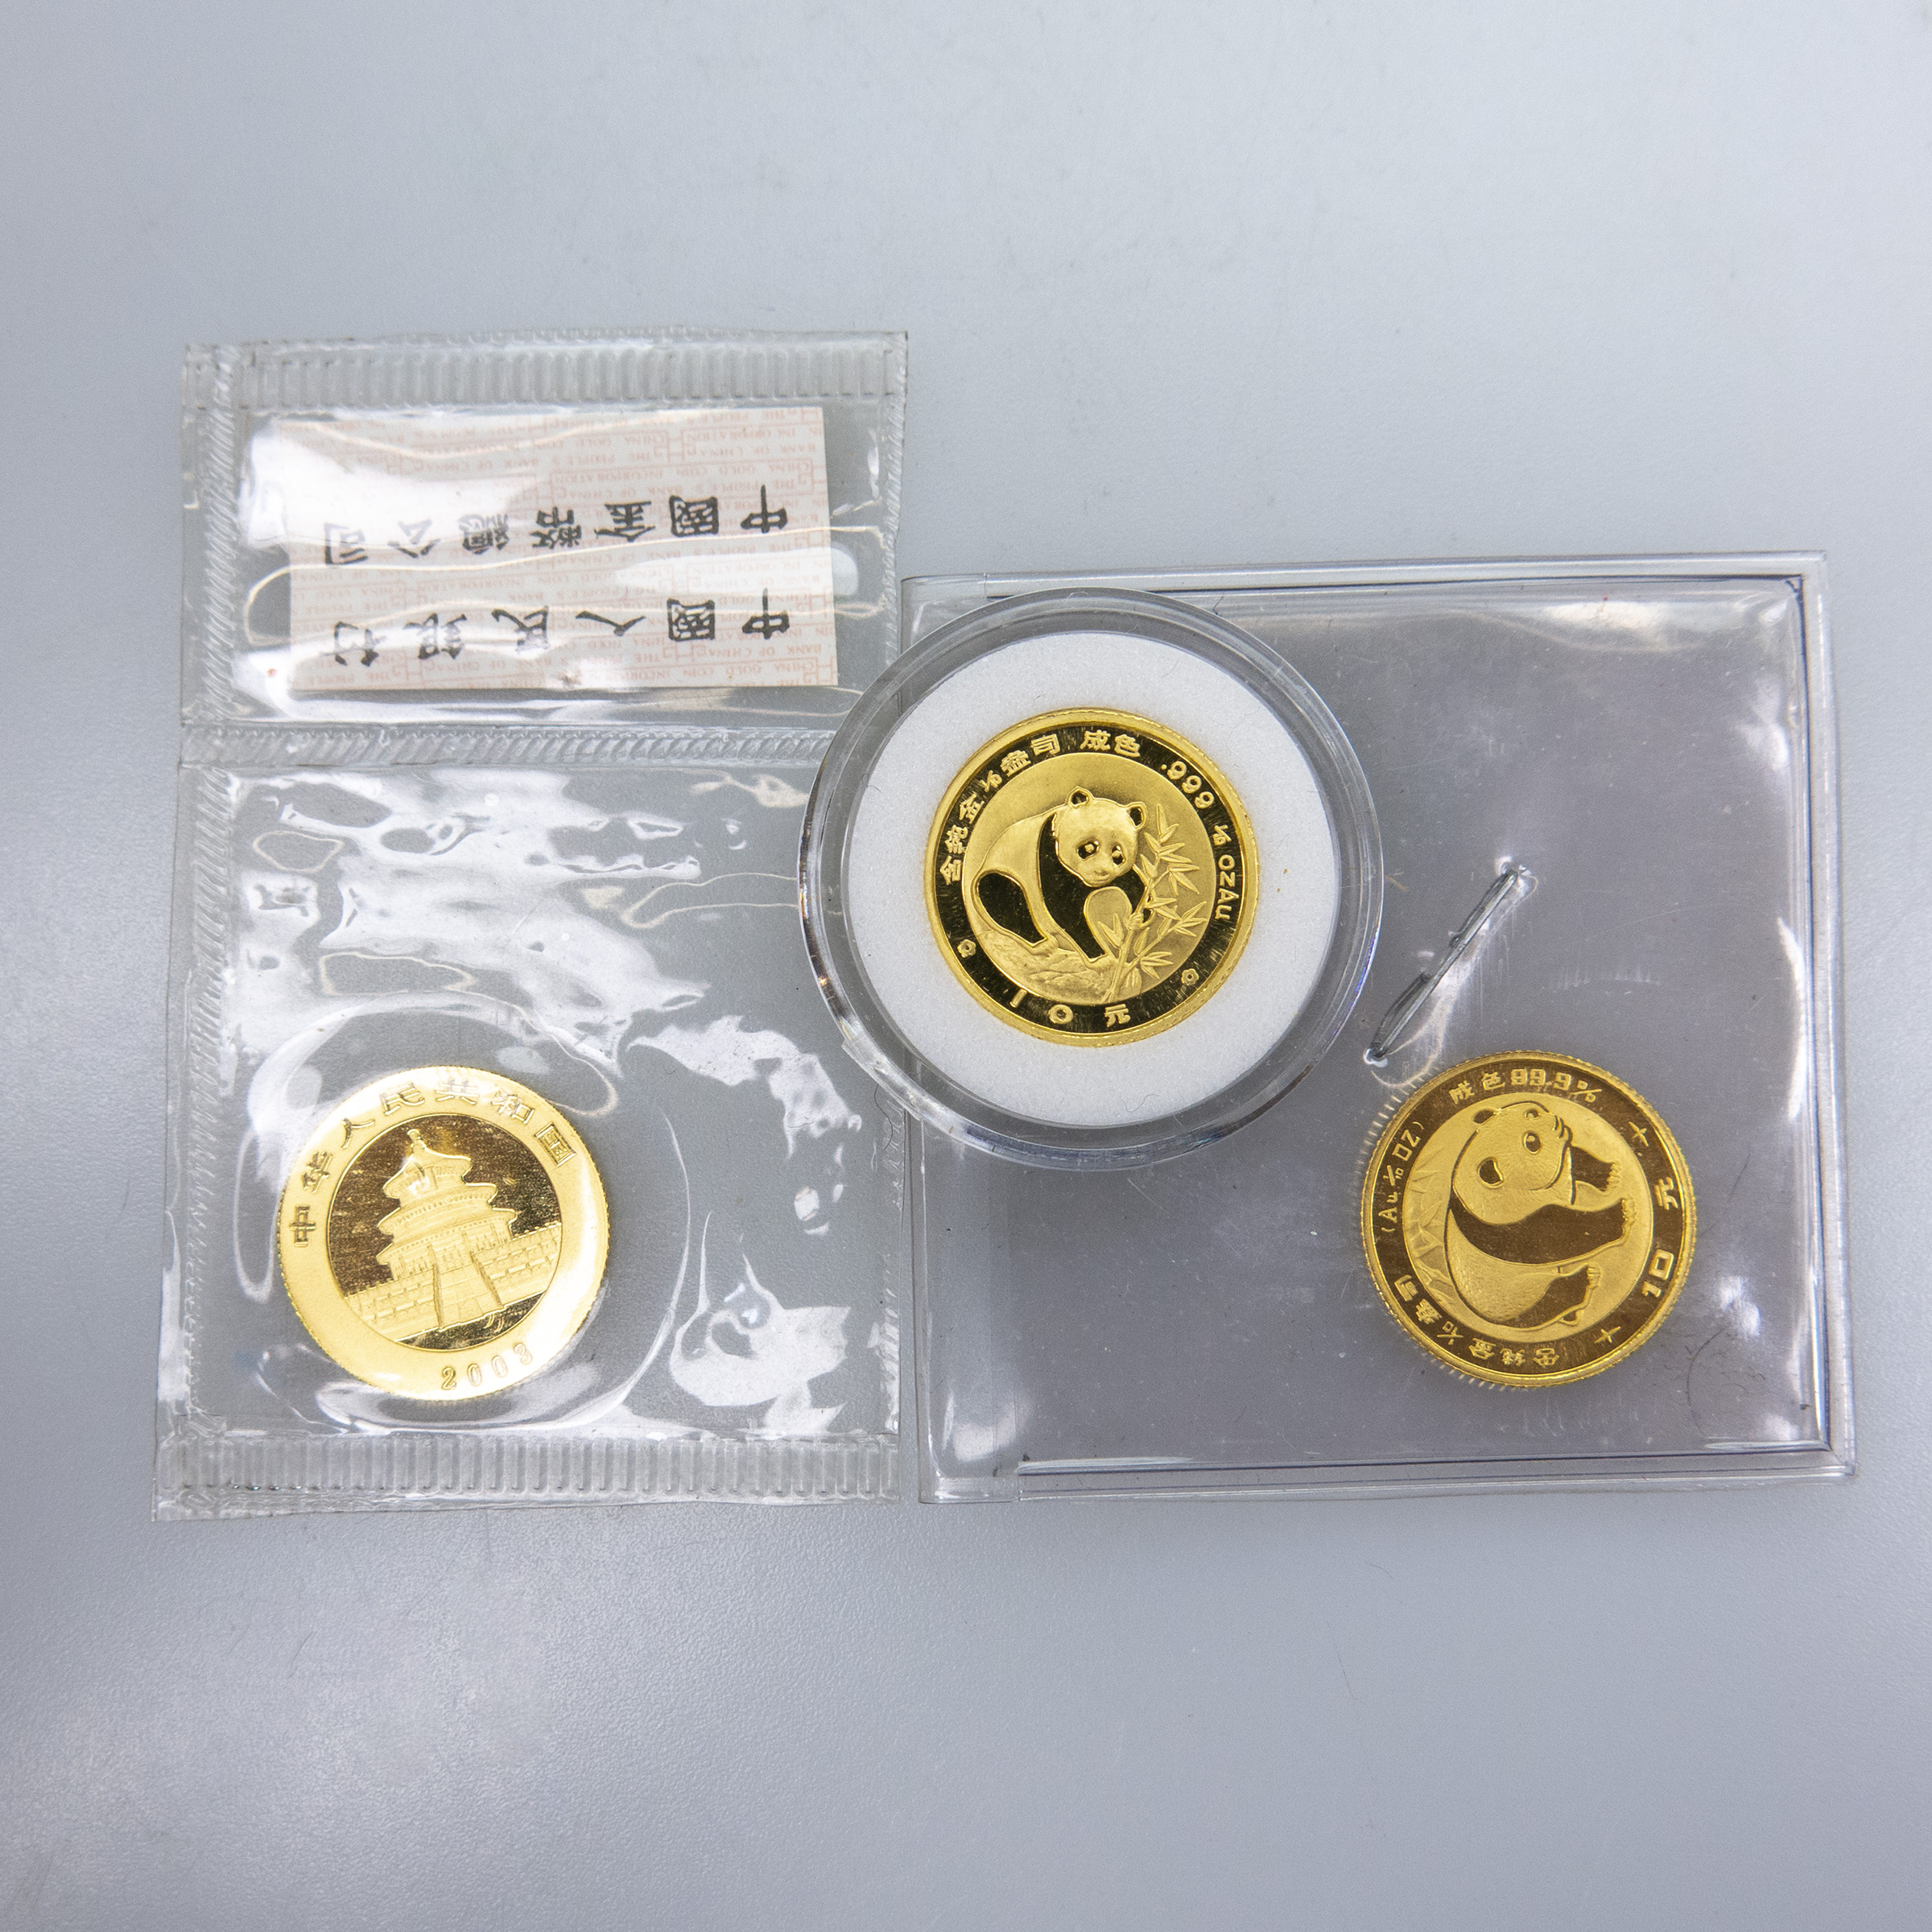 Three Chinese 1/10th Ounce Gold Coins